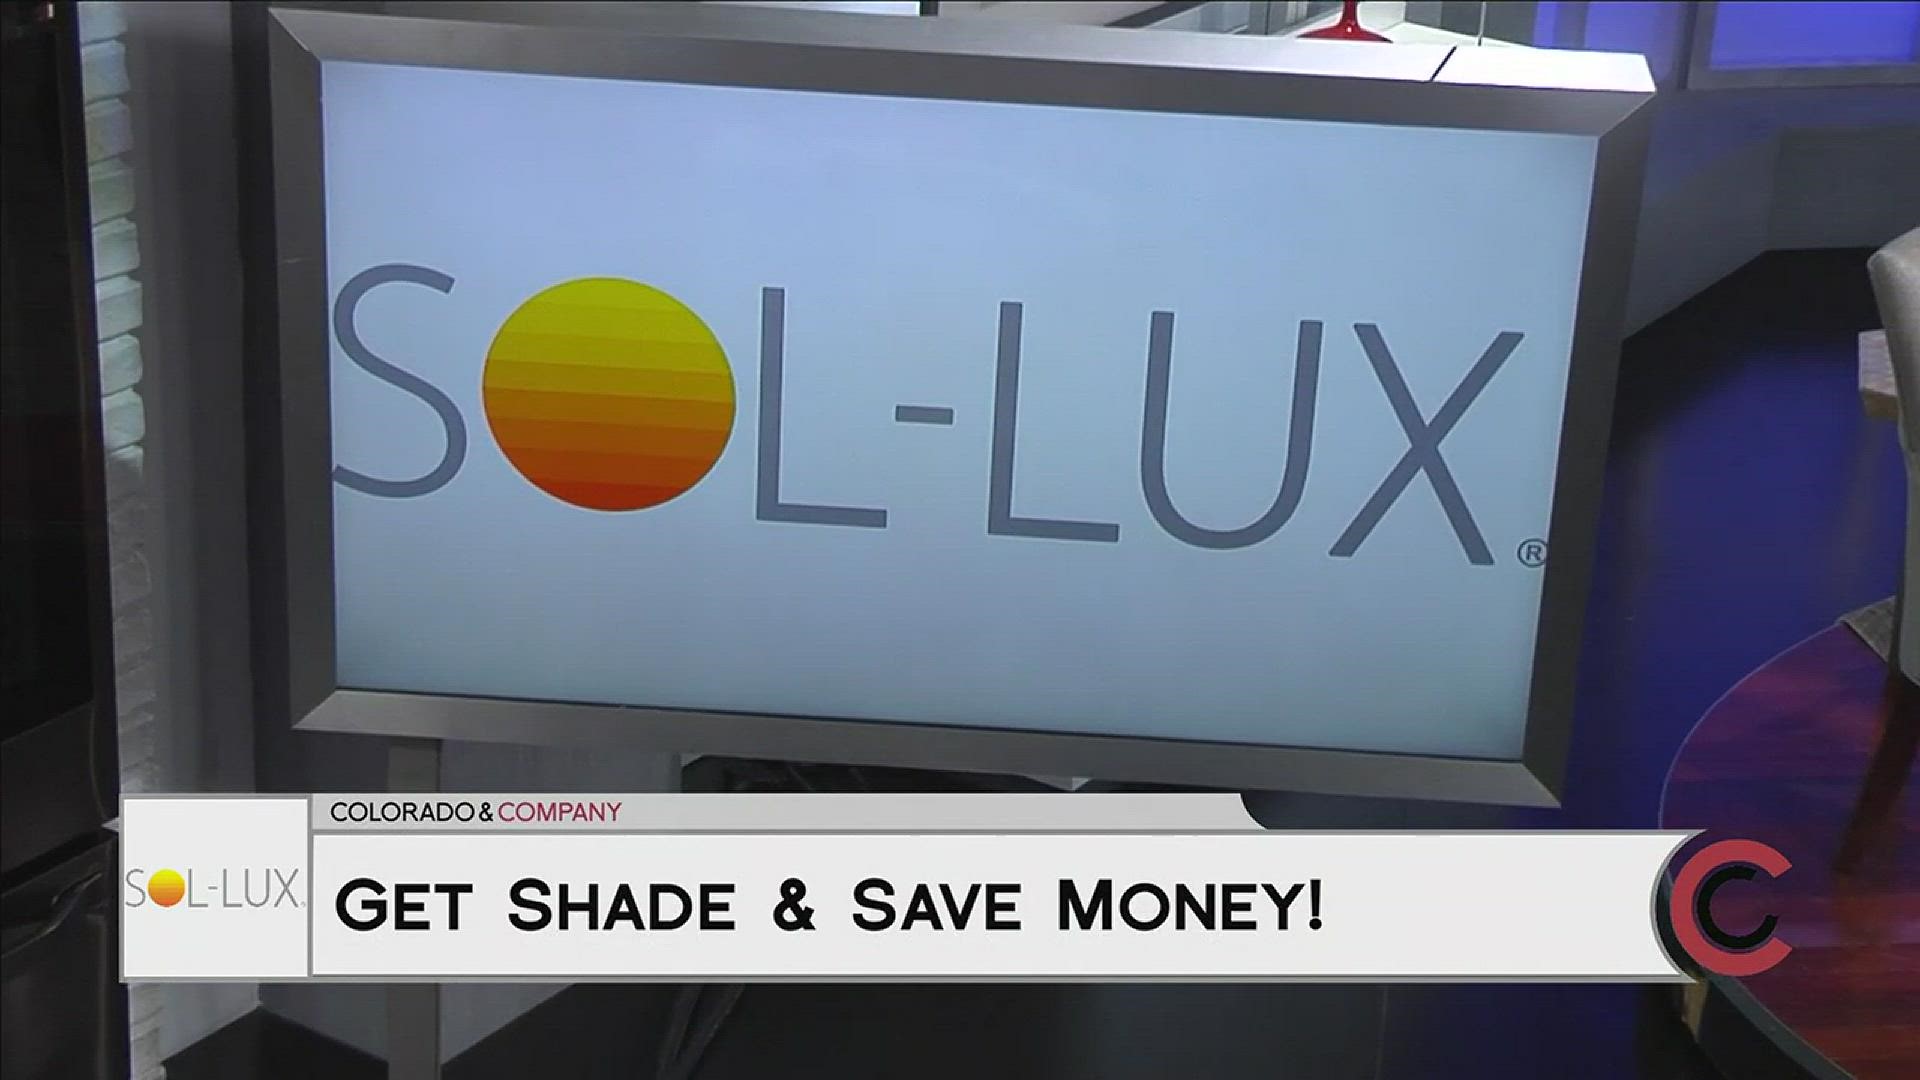 Save money on your energy bills and help protect your furniture, flooring and windows from fading! The Sol-Lux Window Awning is designed to keep sunlight off your windows and your home cool. Sol-lux automatically opens and closes in response to the weather! Call now for an exclusive offer for CoCo viewers... During the month of April, Jimmie will give you $200 off your Sol-Lux purchase. Call 303.298.8888 and mention Colorado and Company. Learn more at www.GutterHelmet.com. THIS INTERVIEW HAS COMMERCIAL CONTENT. PRODUCTS AND SERVICES FEATURED APPEAR AS PAID ADVERTISING.